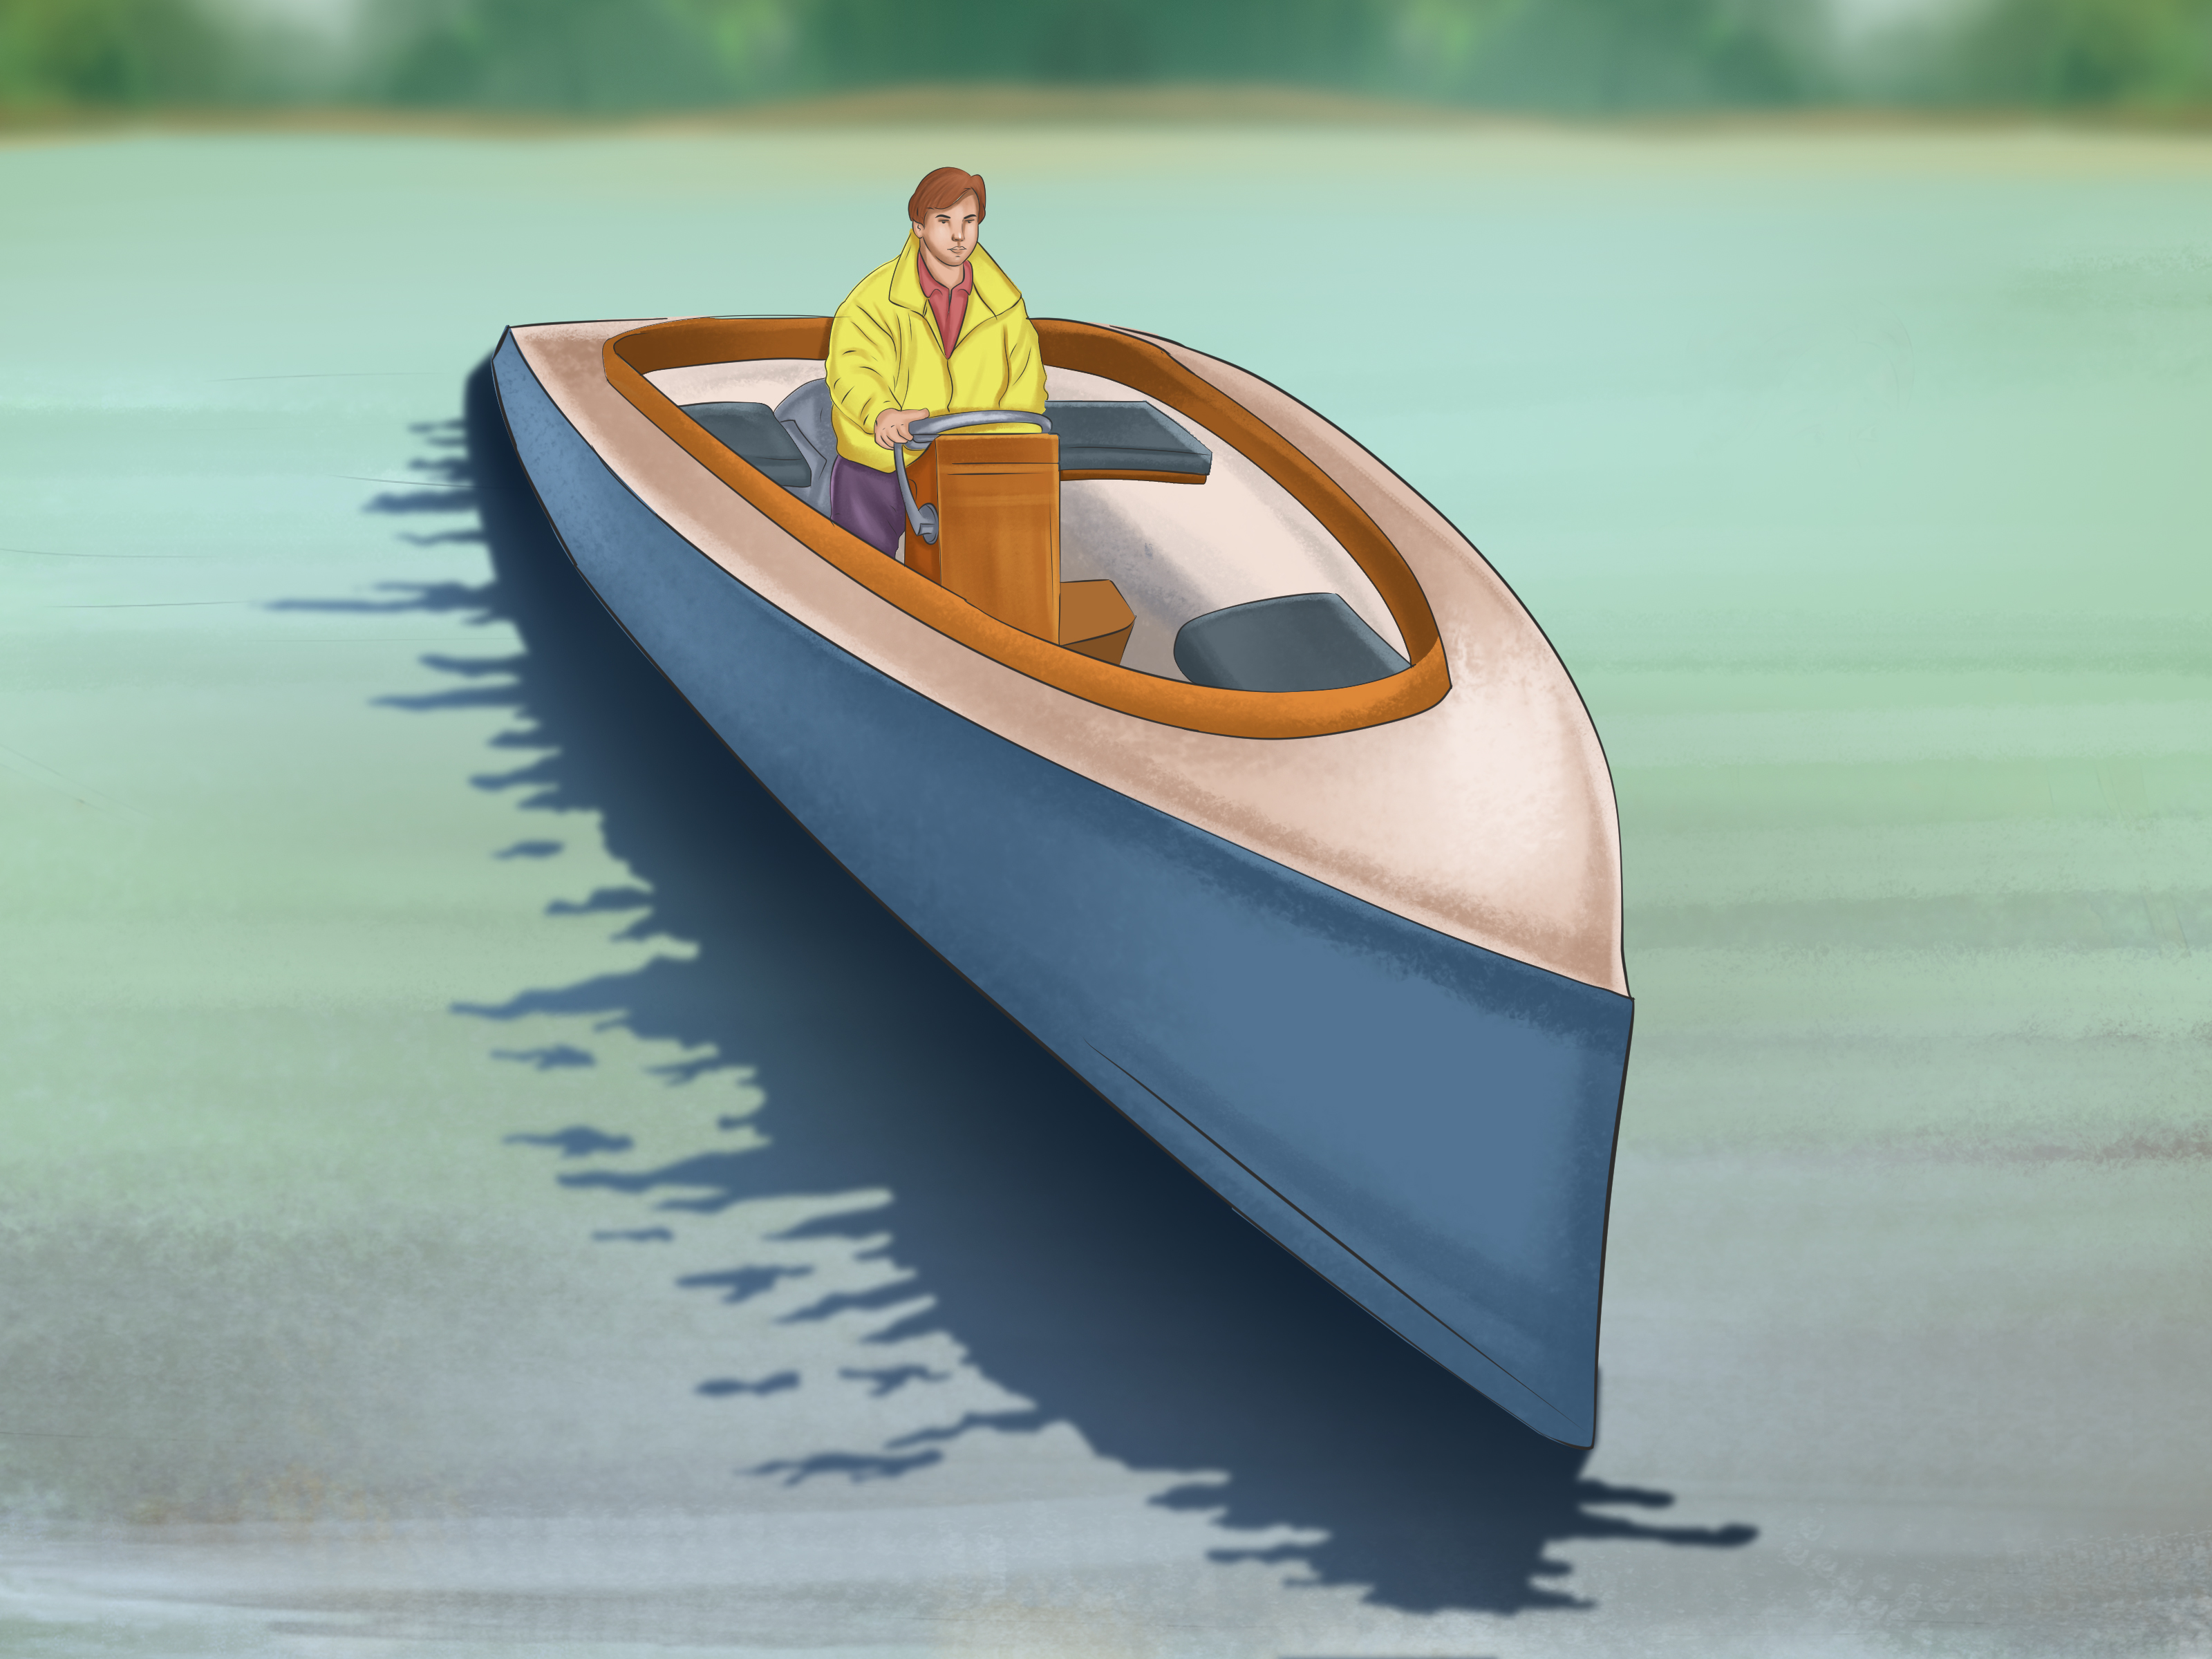 How to Build a Plywood Boat: 8 Steps (with Pictures) - wikiHow